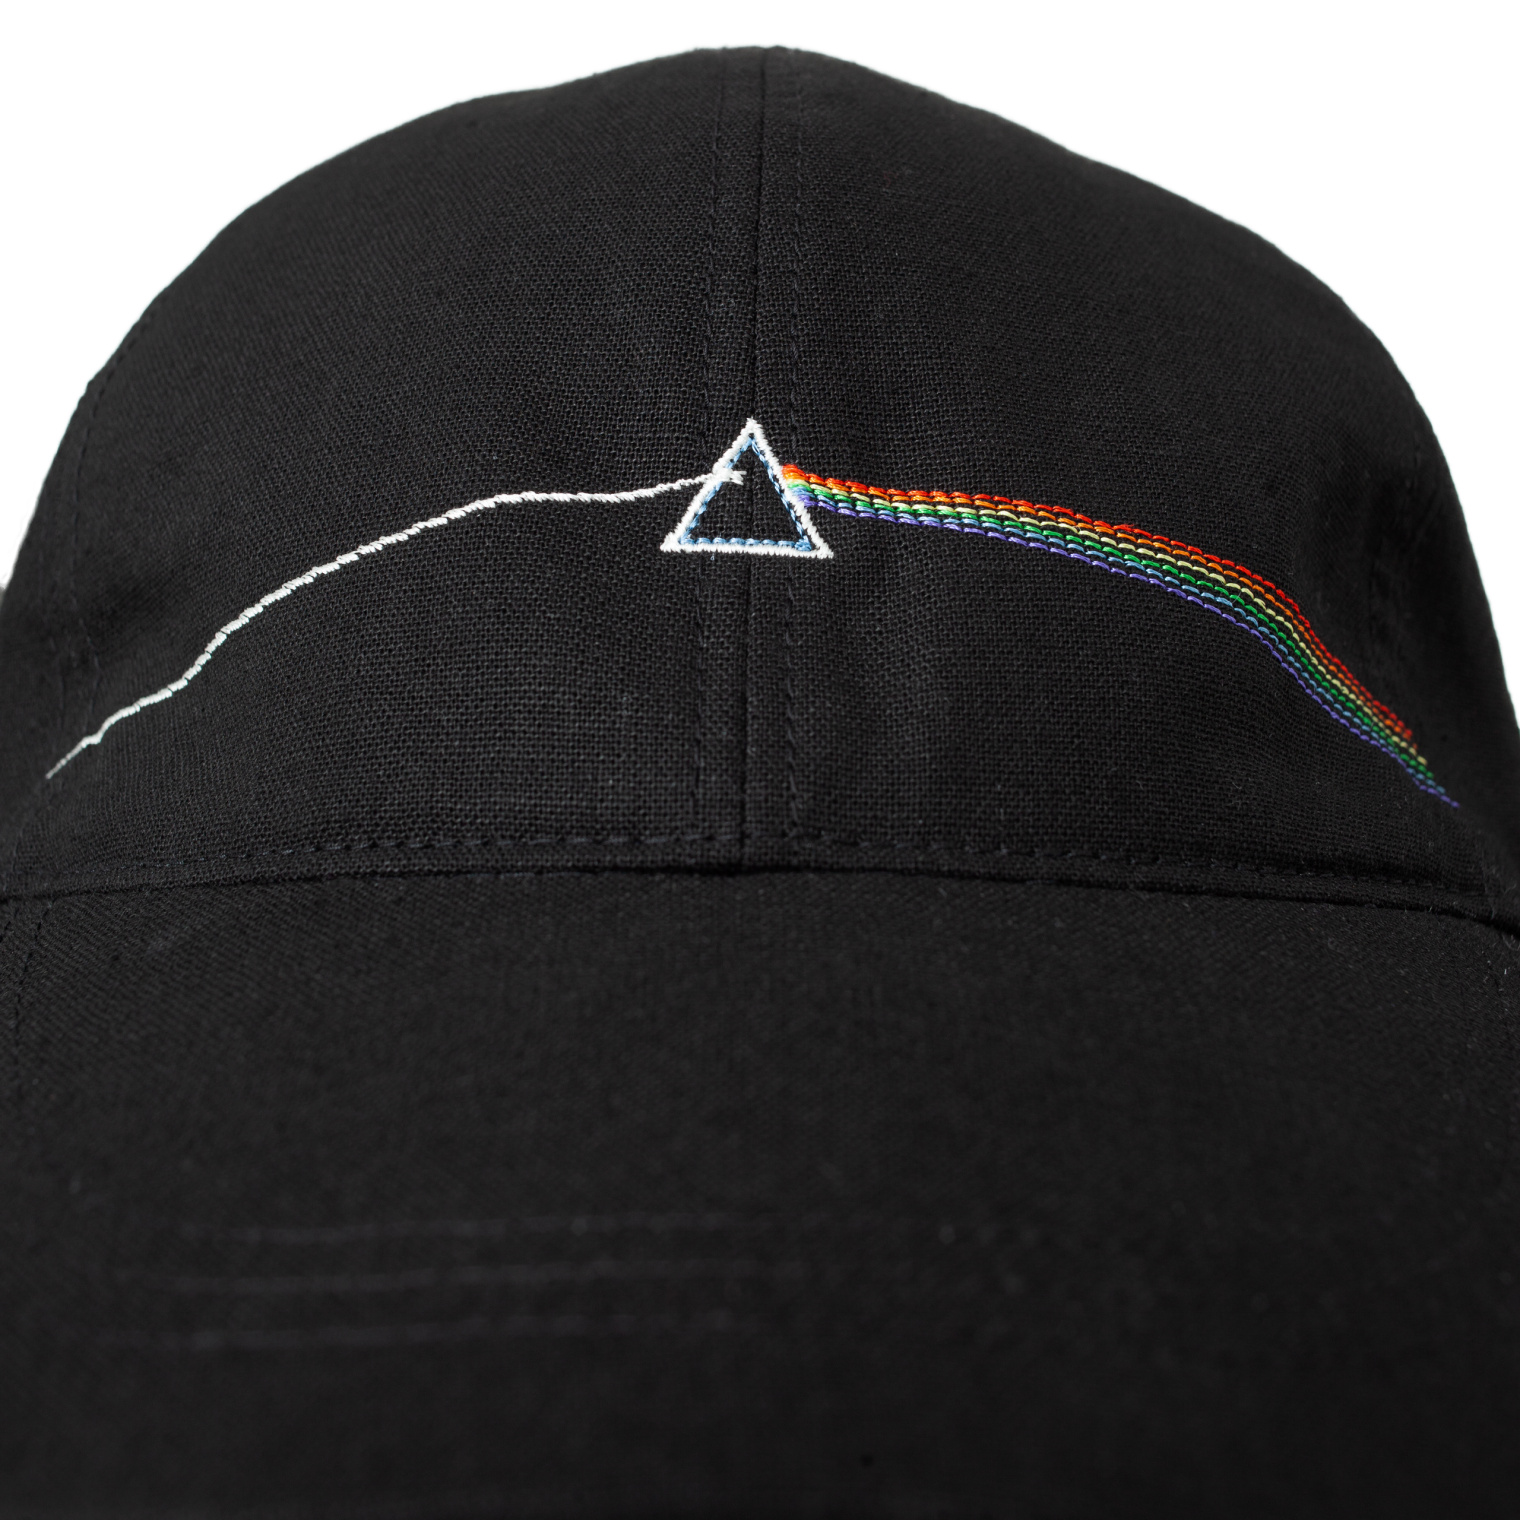 Undercover Pink Floyd embroidered cap